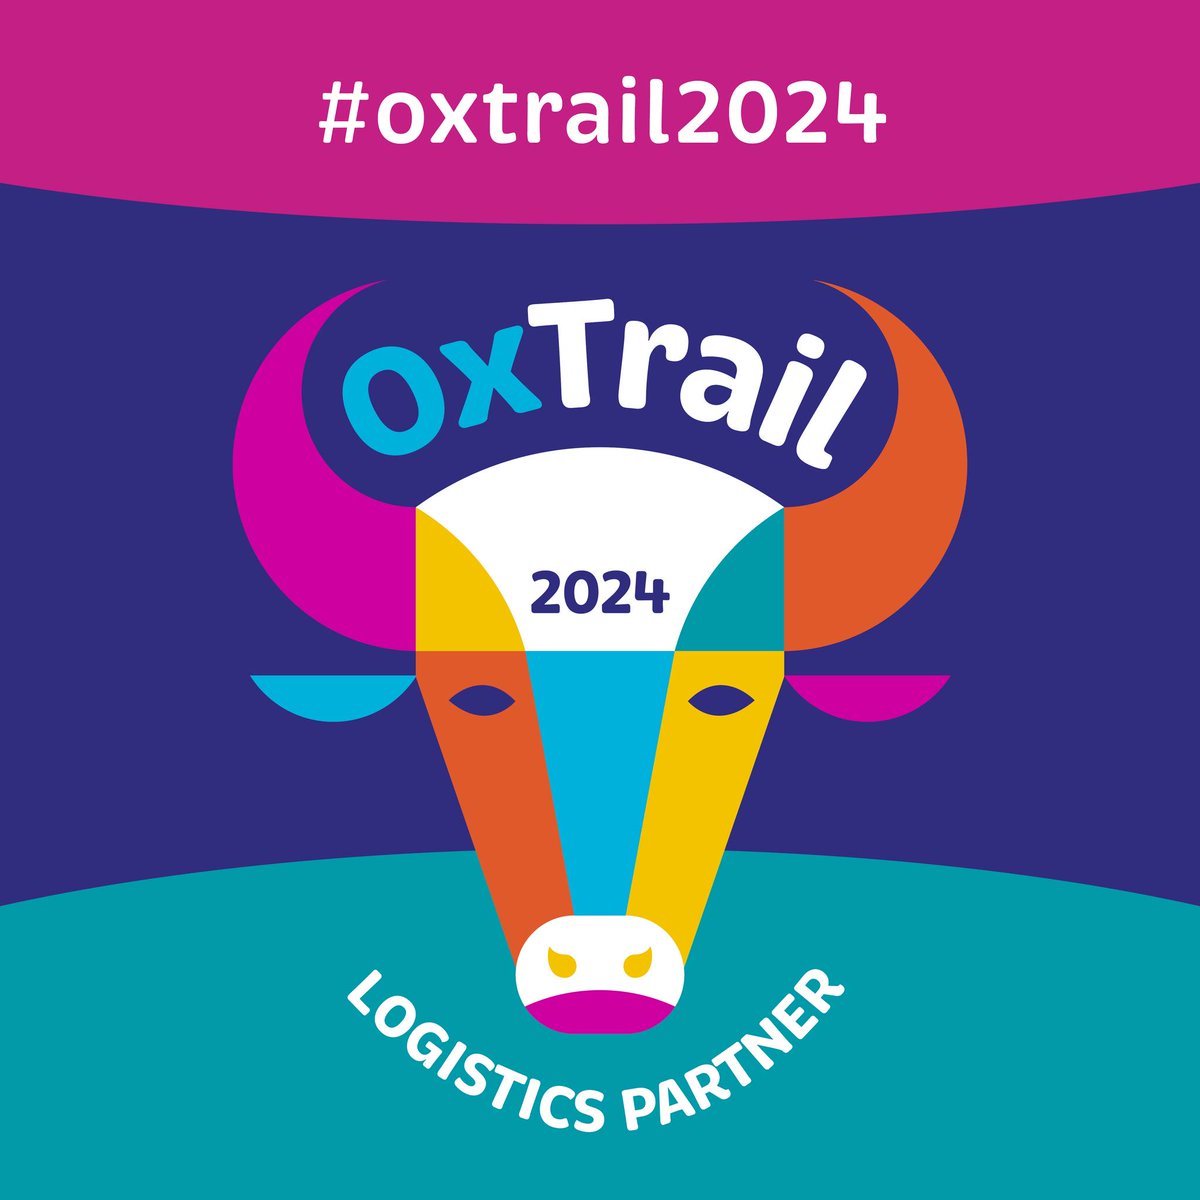 We are excited to announce we are proud sponsors of Oxford’s very first sculpture trail in aid of @sobellhouse Introducing @oxtrail2024, where over 30 life-sized ox sculptures will be ‘herding’ into #Oxford this summer! Find out more: oxtrail2024.co.uk